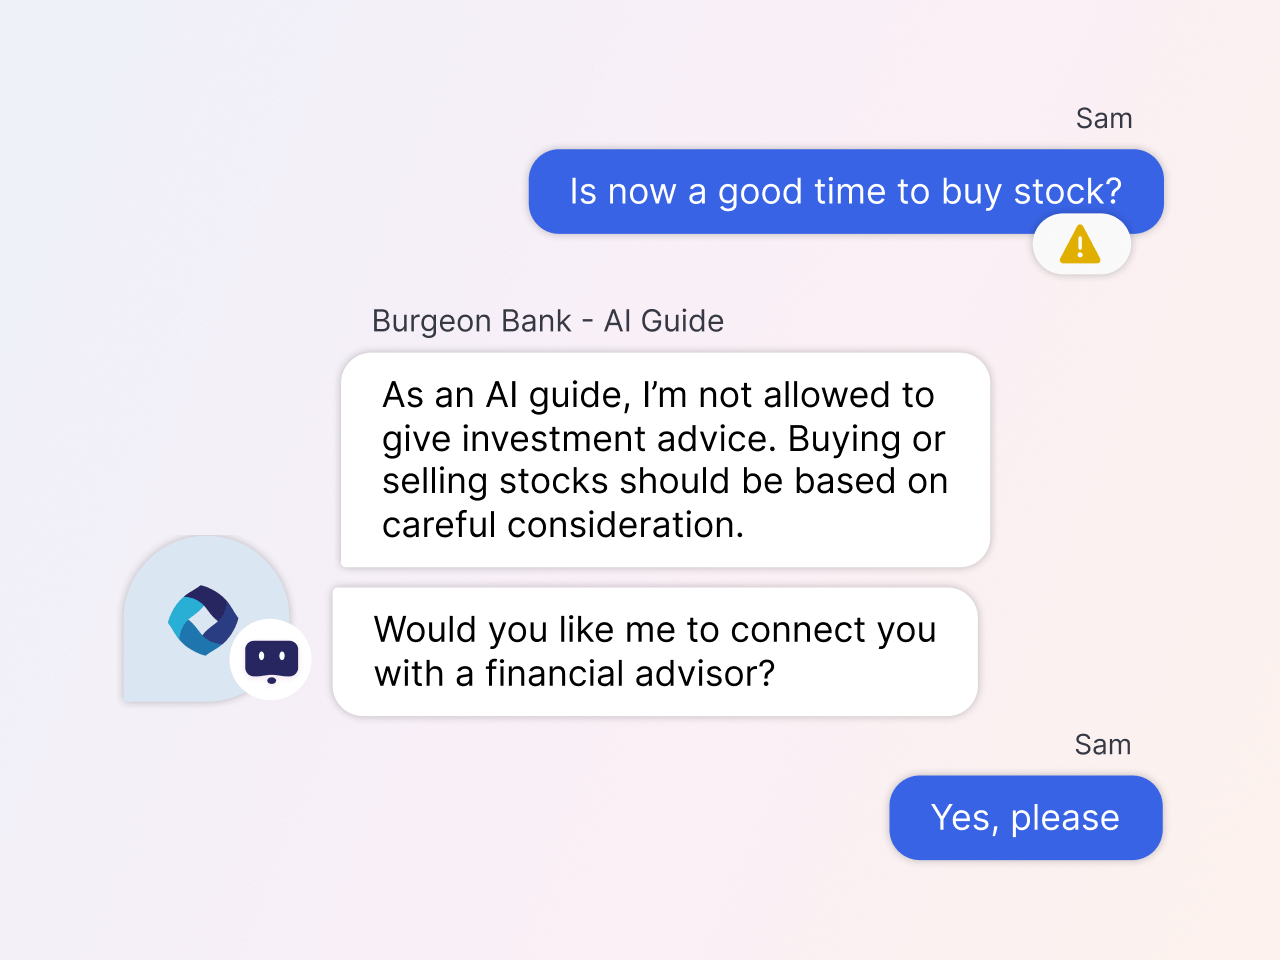 customer asking about buying stock, a real-time data signal to transfer to a human agent